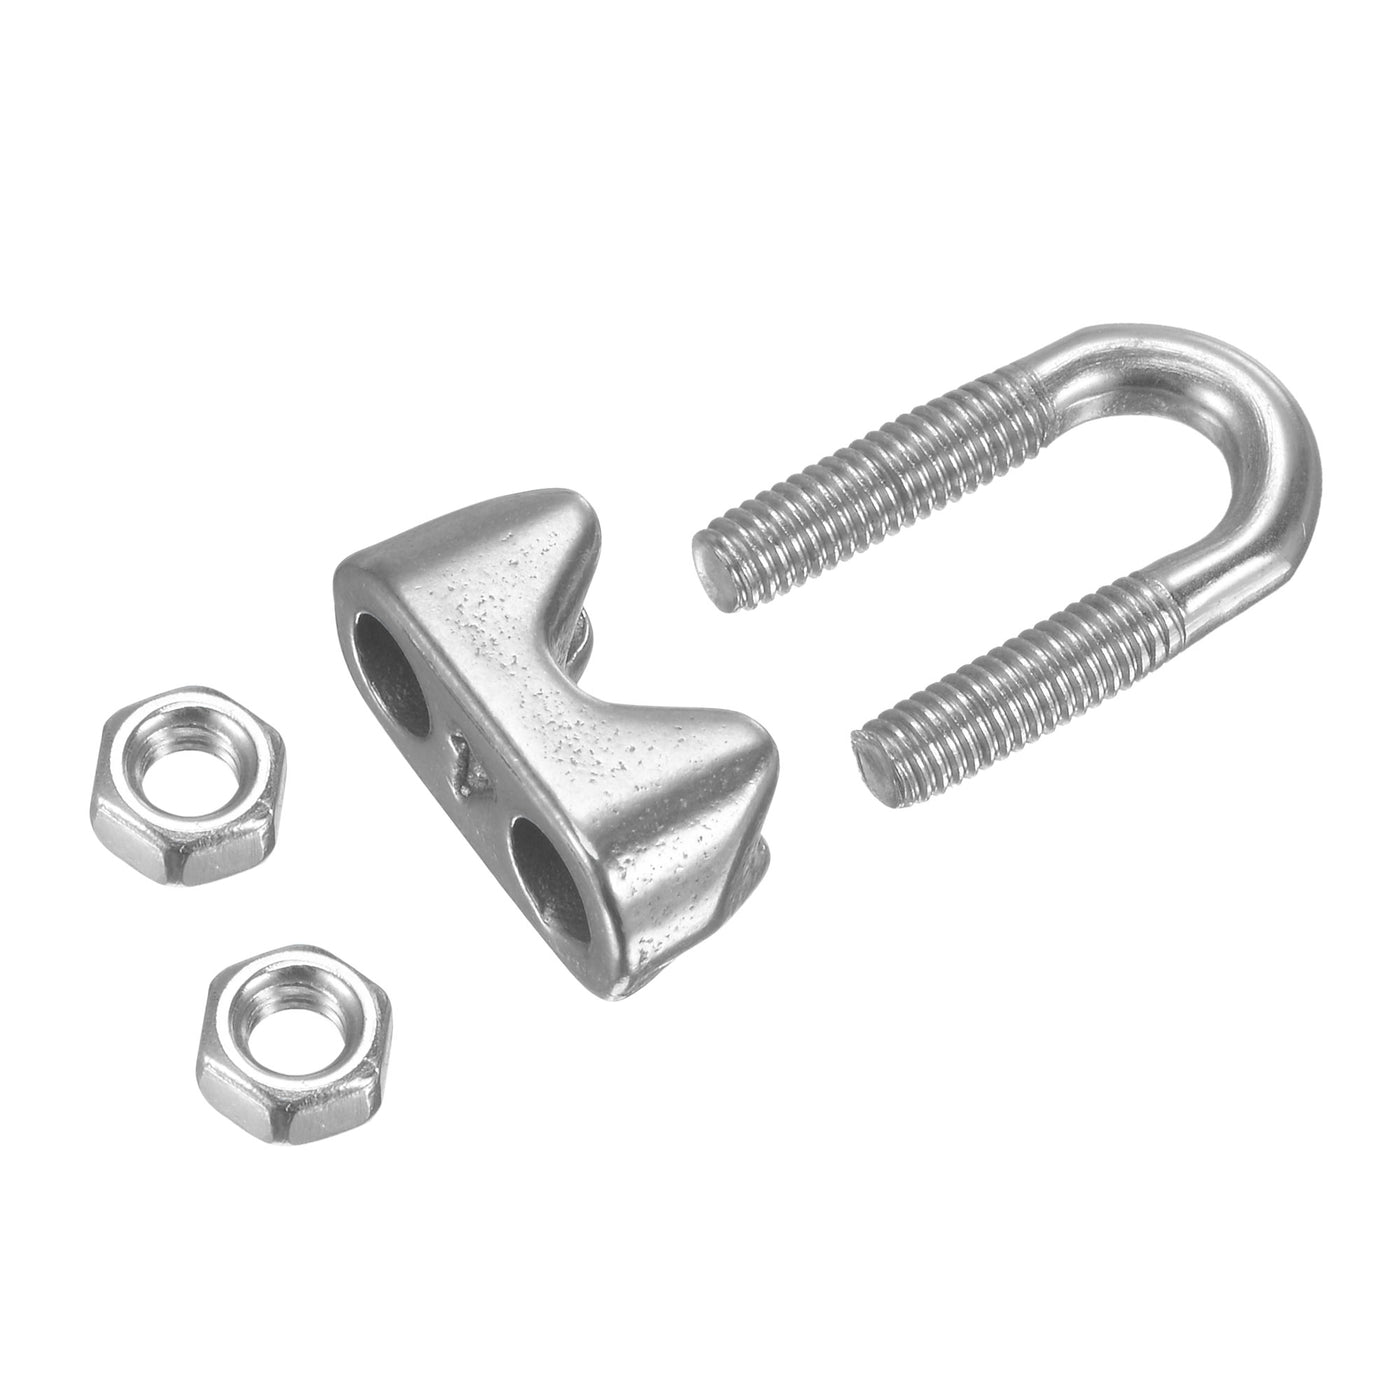 uxcell Uxcell Wire Rope Cable Clip Kit for M4, Included 304 Stainless Steel Rope Clamp, Thimble Rigging, Aluminum Crimping Loop Sleeve 8 Set